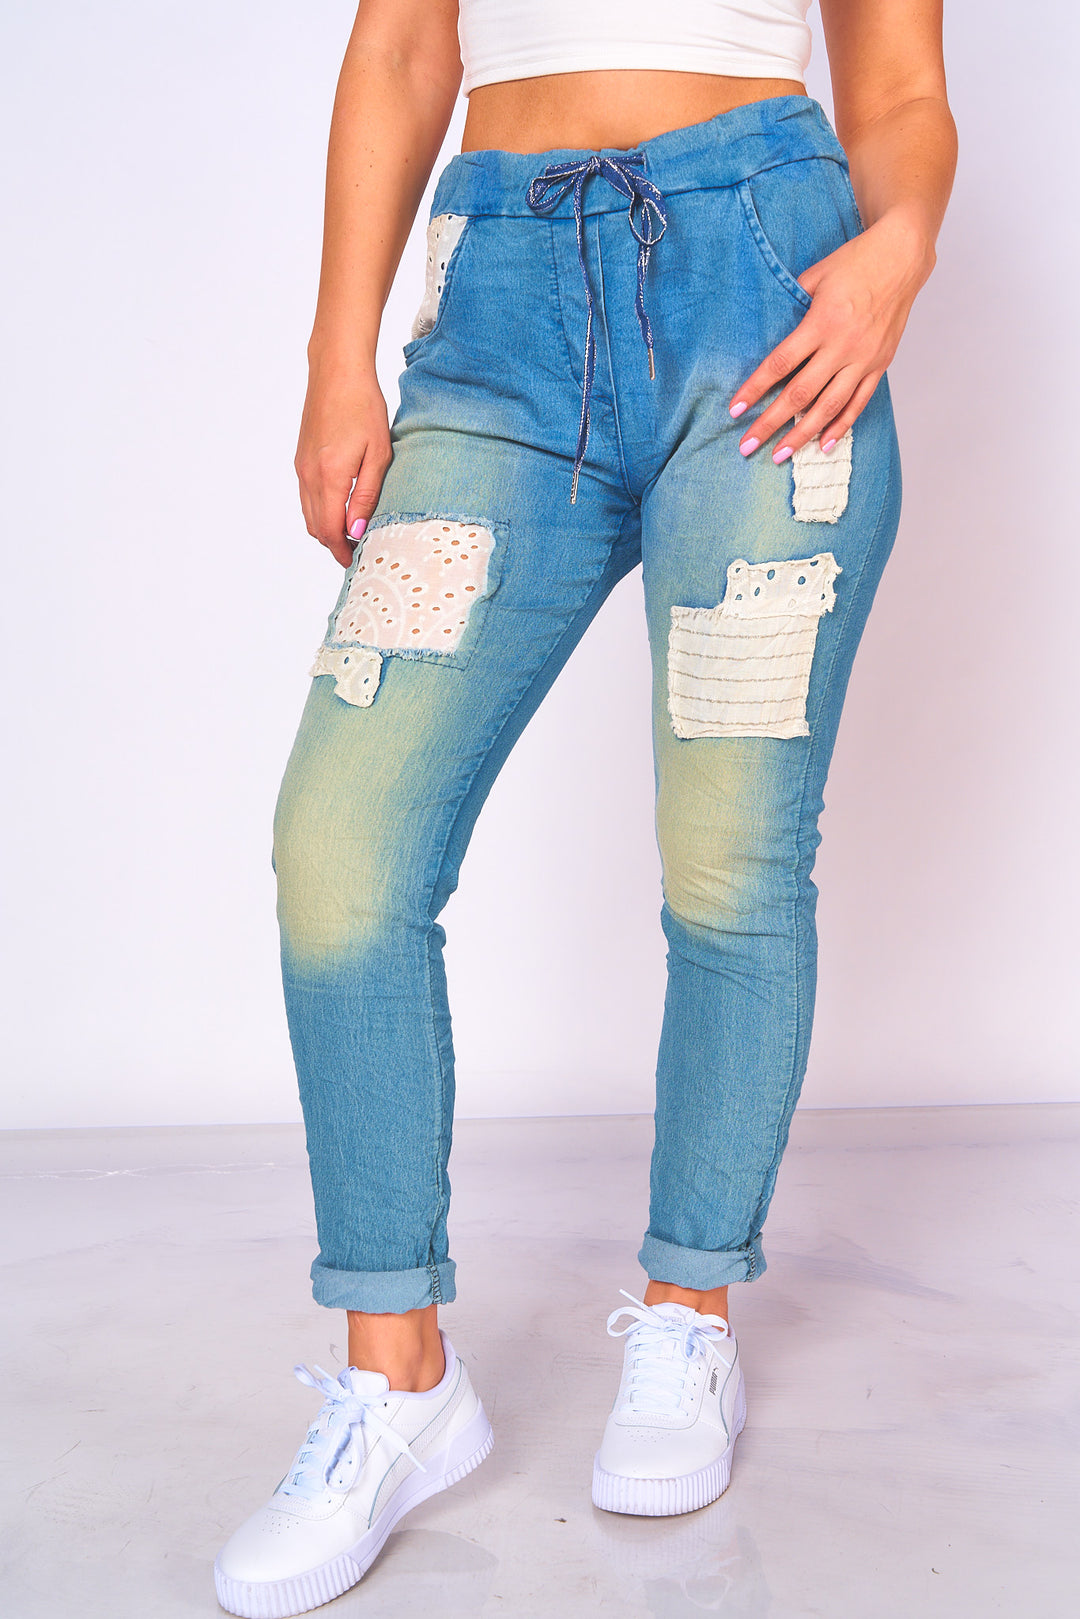 Embroidered Jeans Joggers Pants